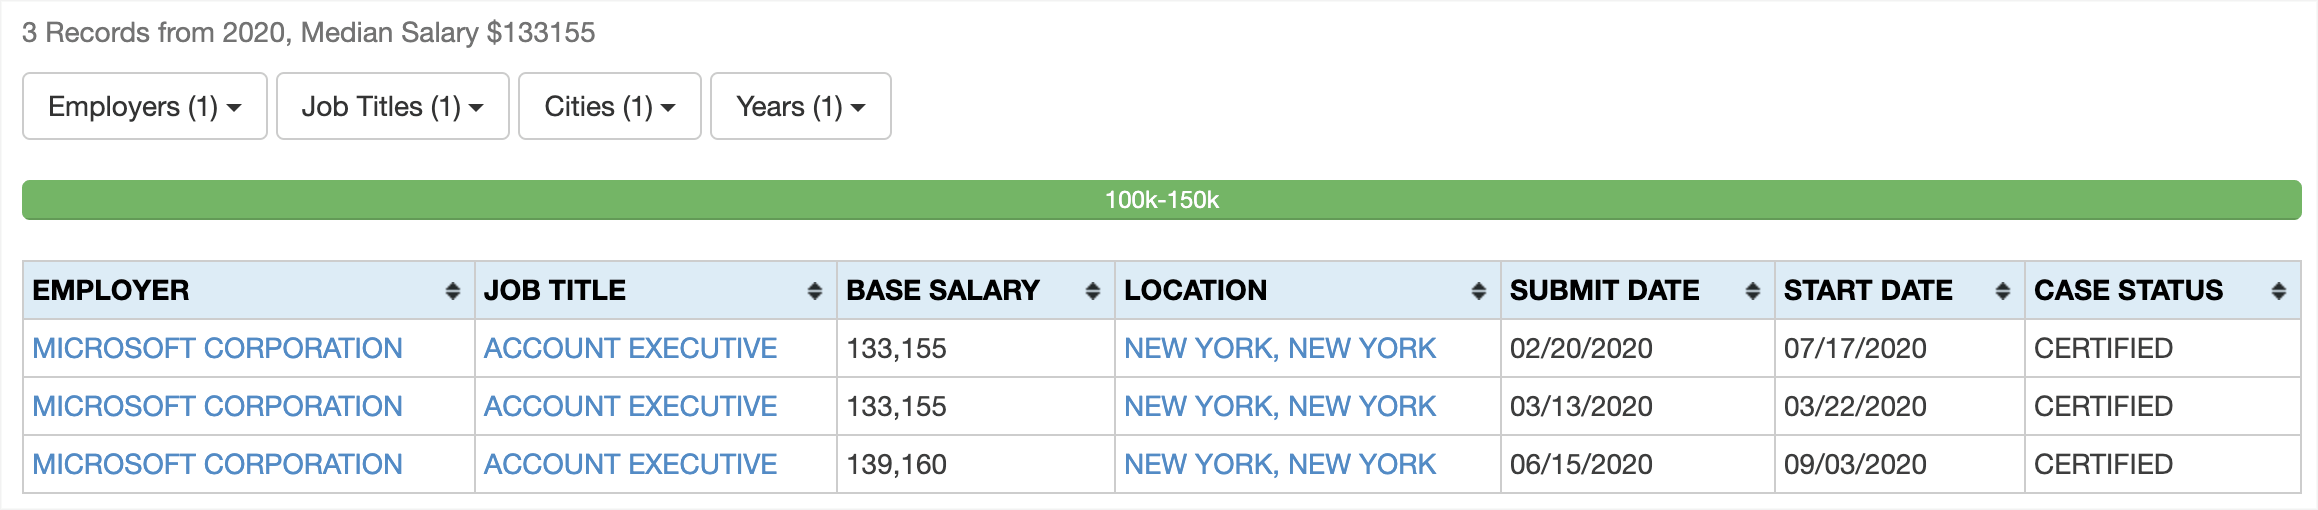 Examples of Salary Research for Visa Sponsored Employees